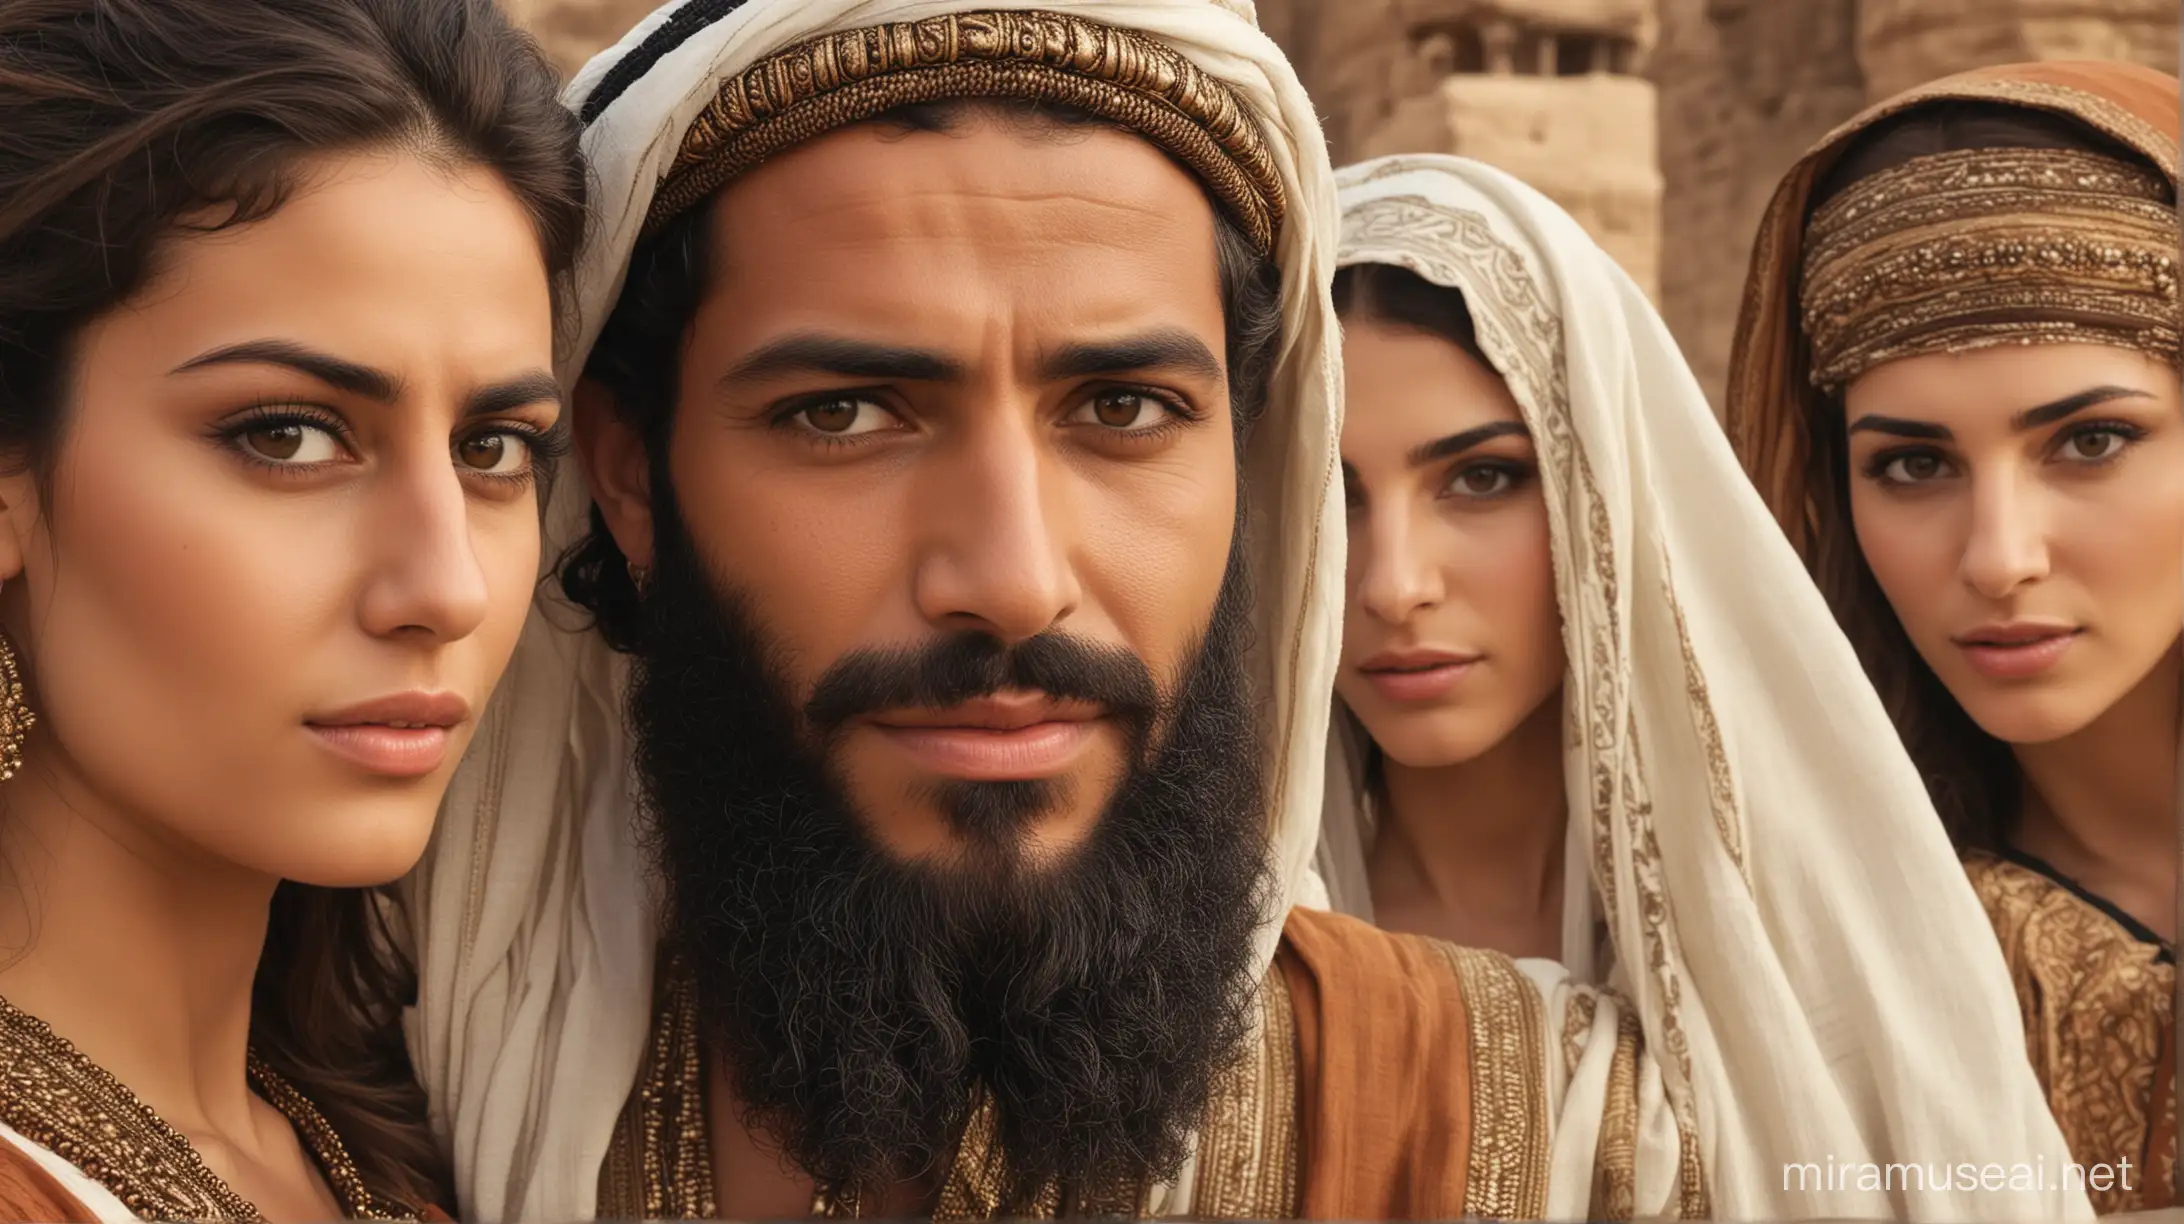 a close up of A Middle Eastern man  and 2 beautiful women. Set in the era of Moses